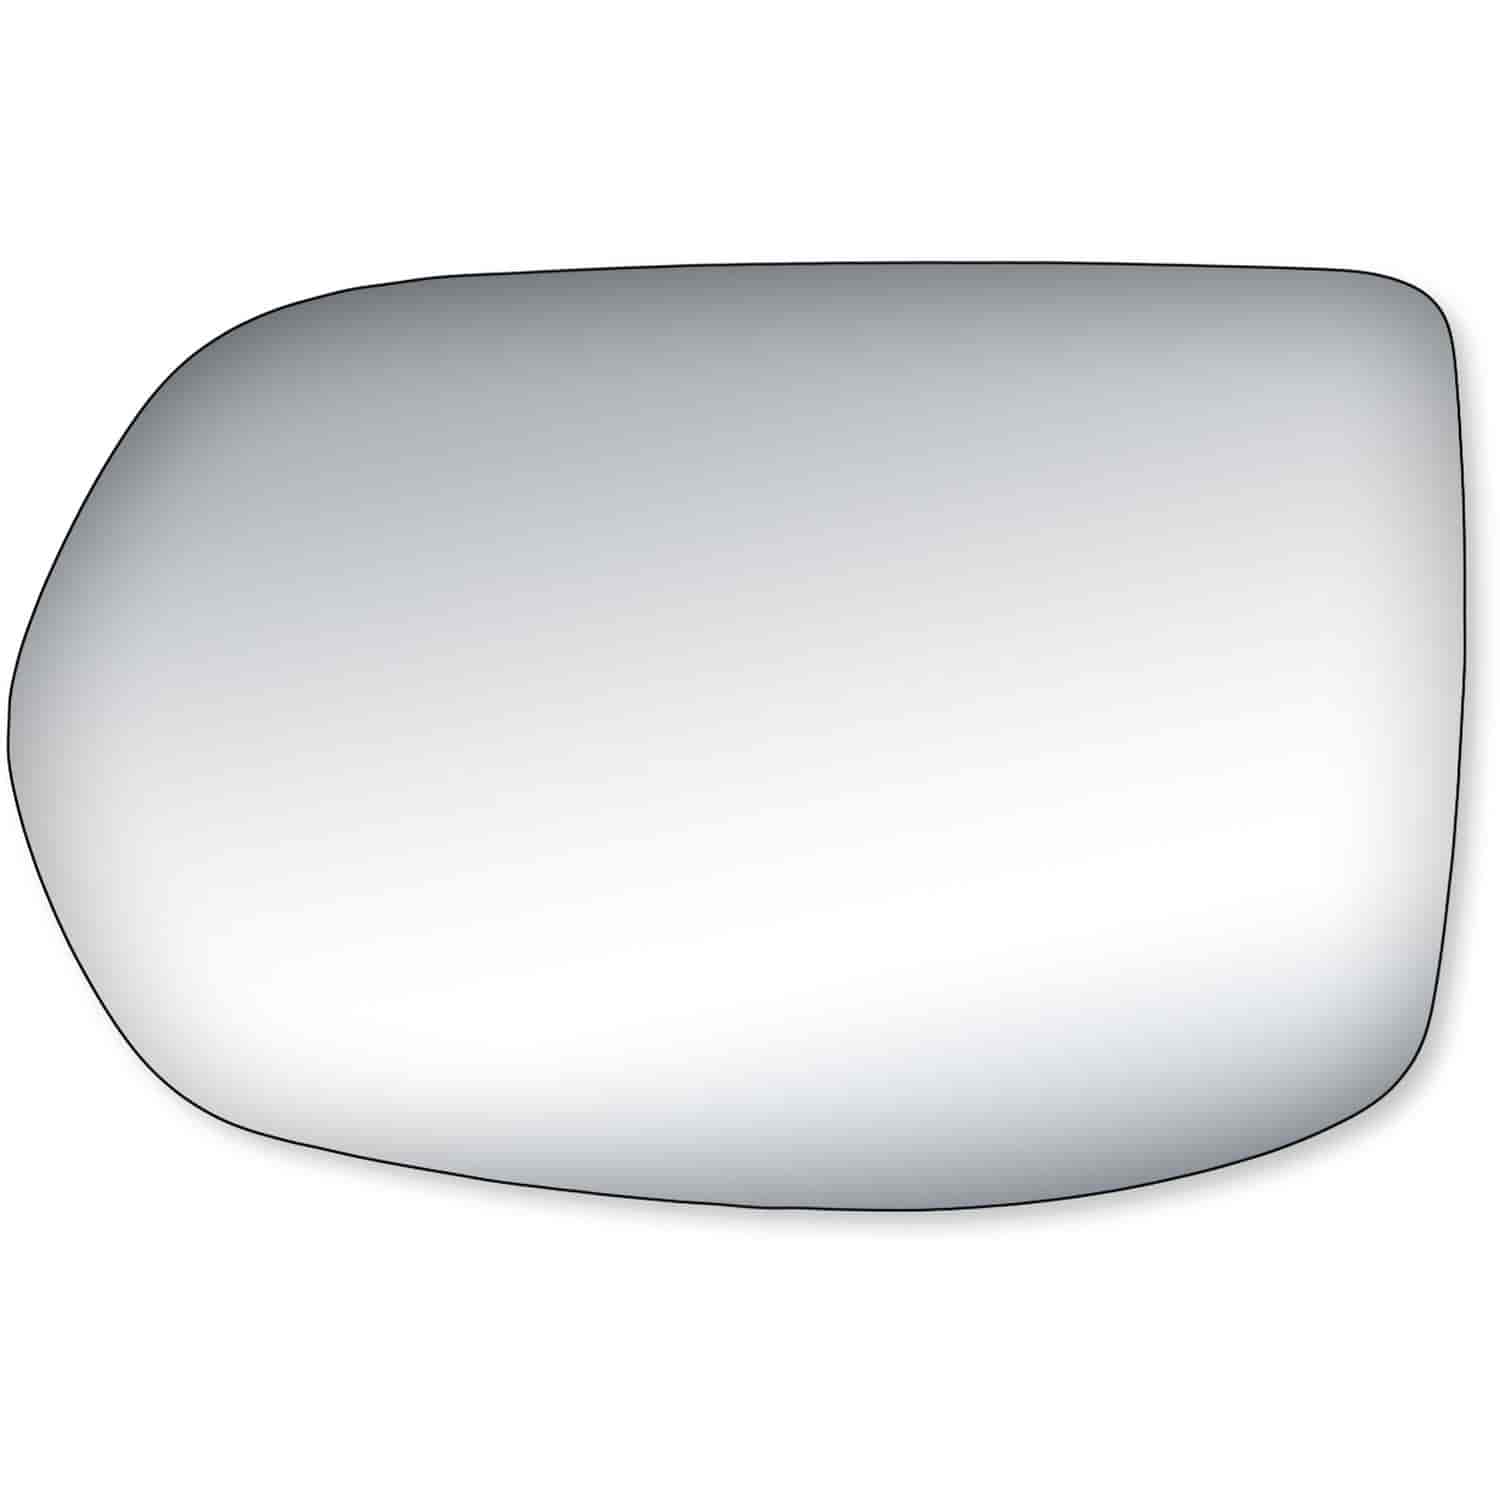 Replacement Glass for 07-11 CR-V the glass measures 4 1/8 tall by 7 1/8 wide and 7 1/4 diagonally gl